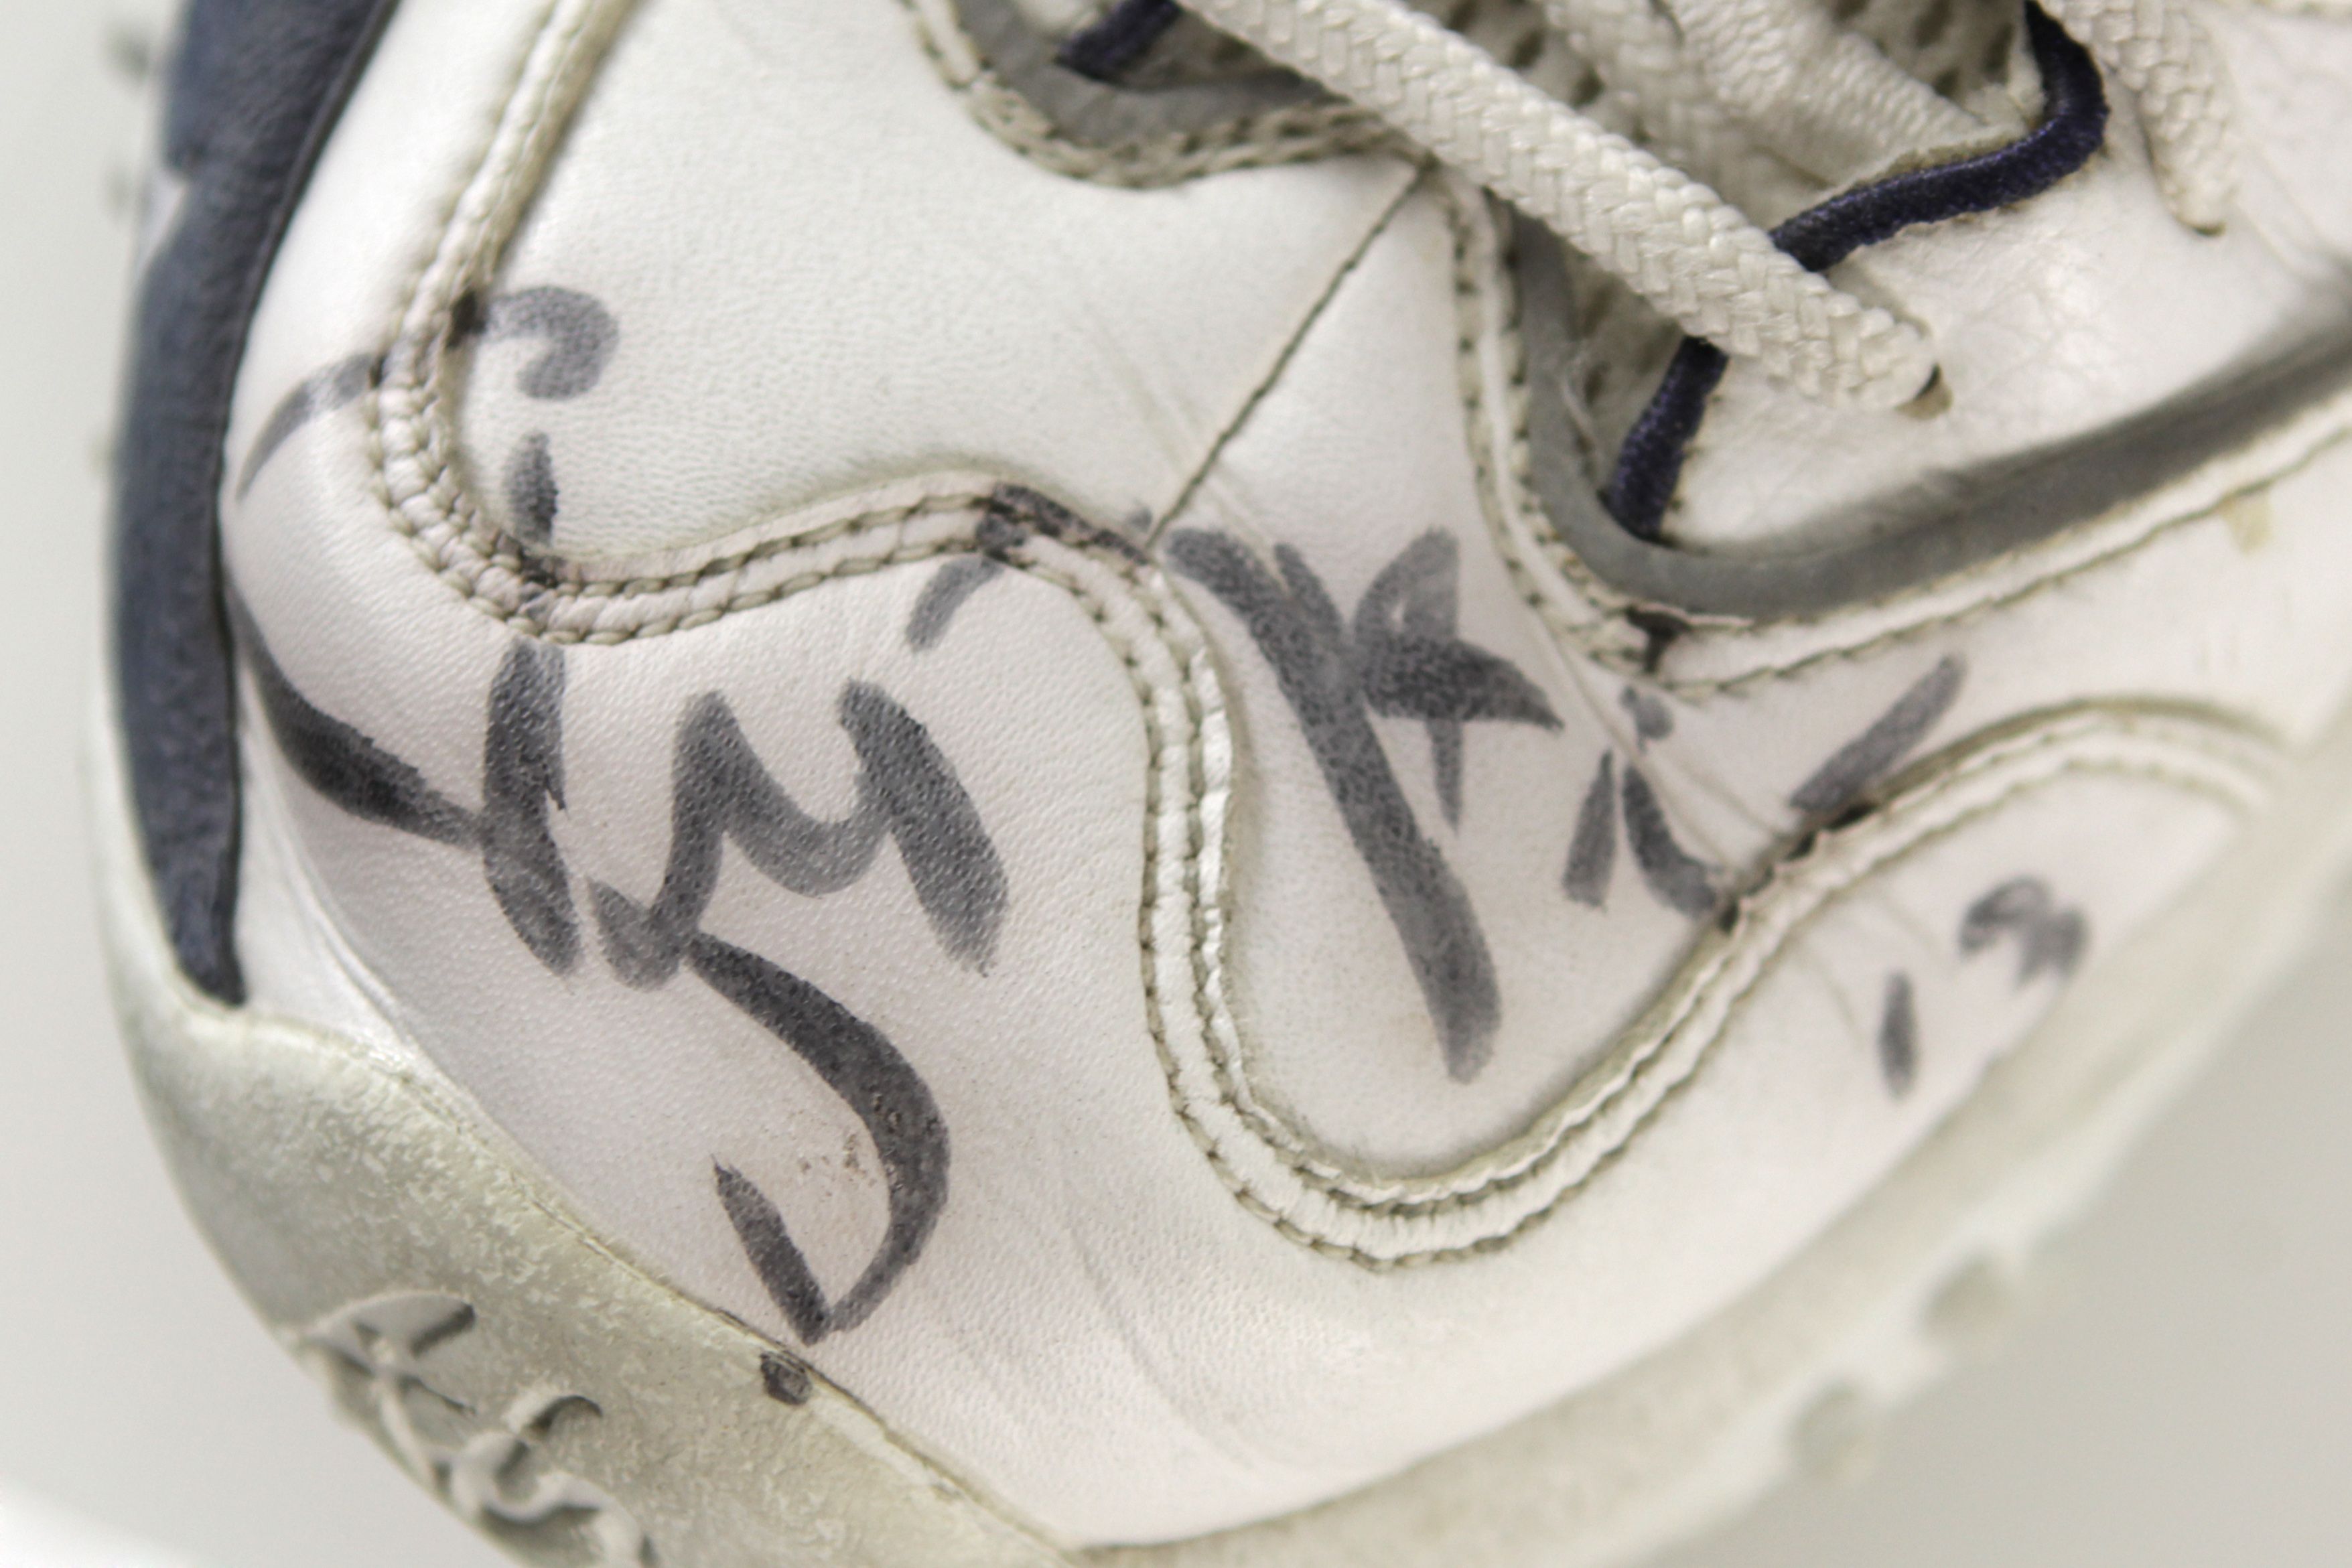 After tears, 4-year-old lands Steve Nash's autographed sneakers